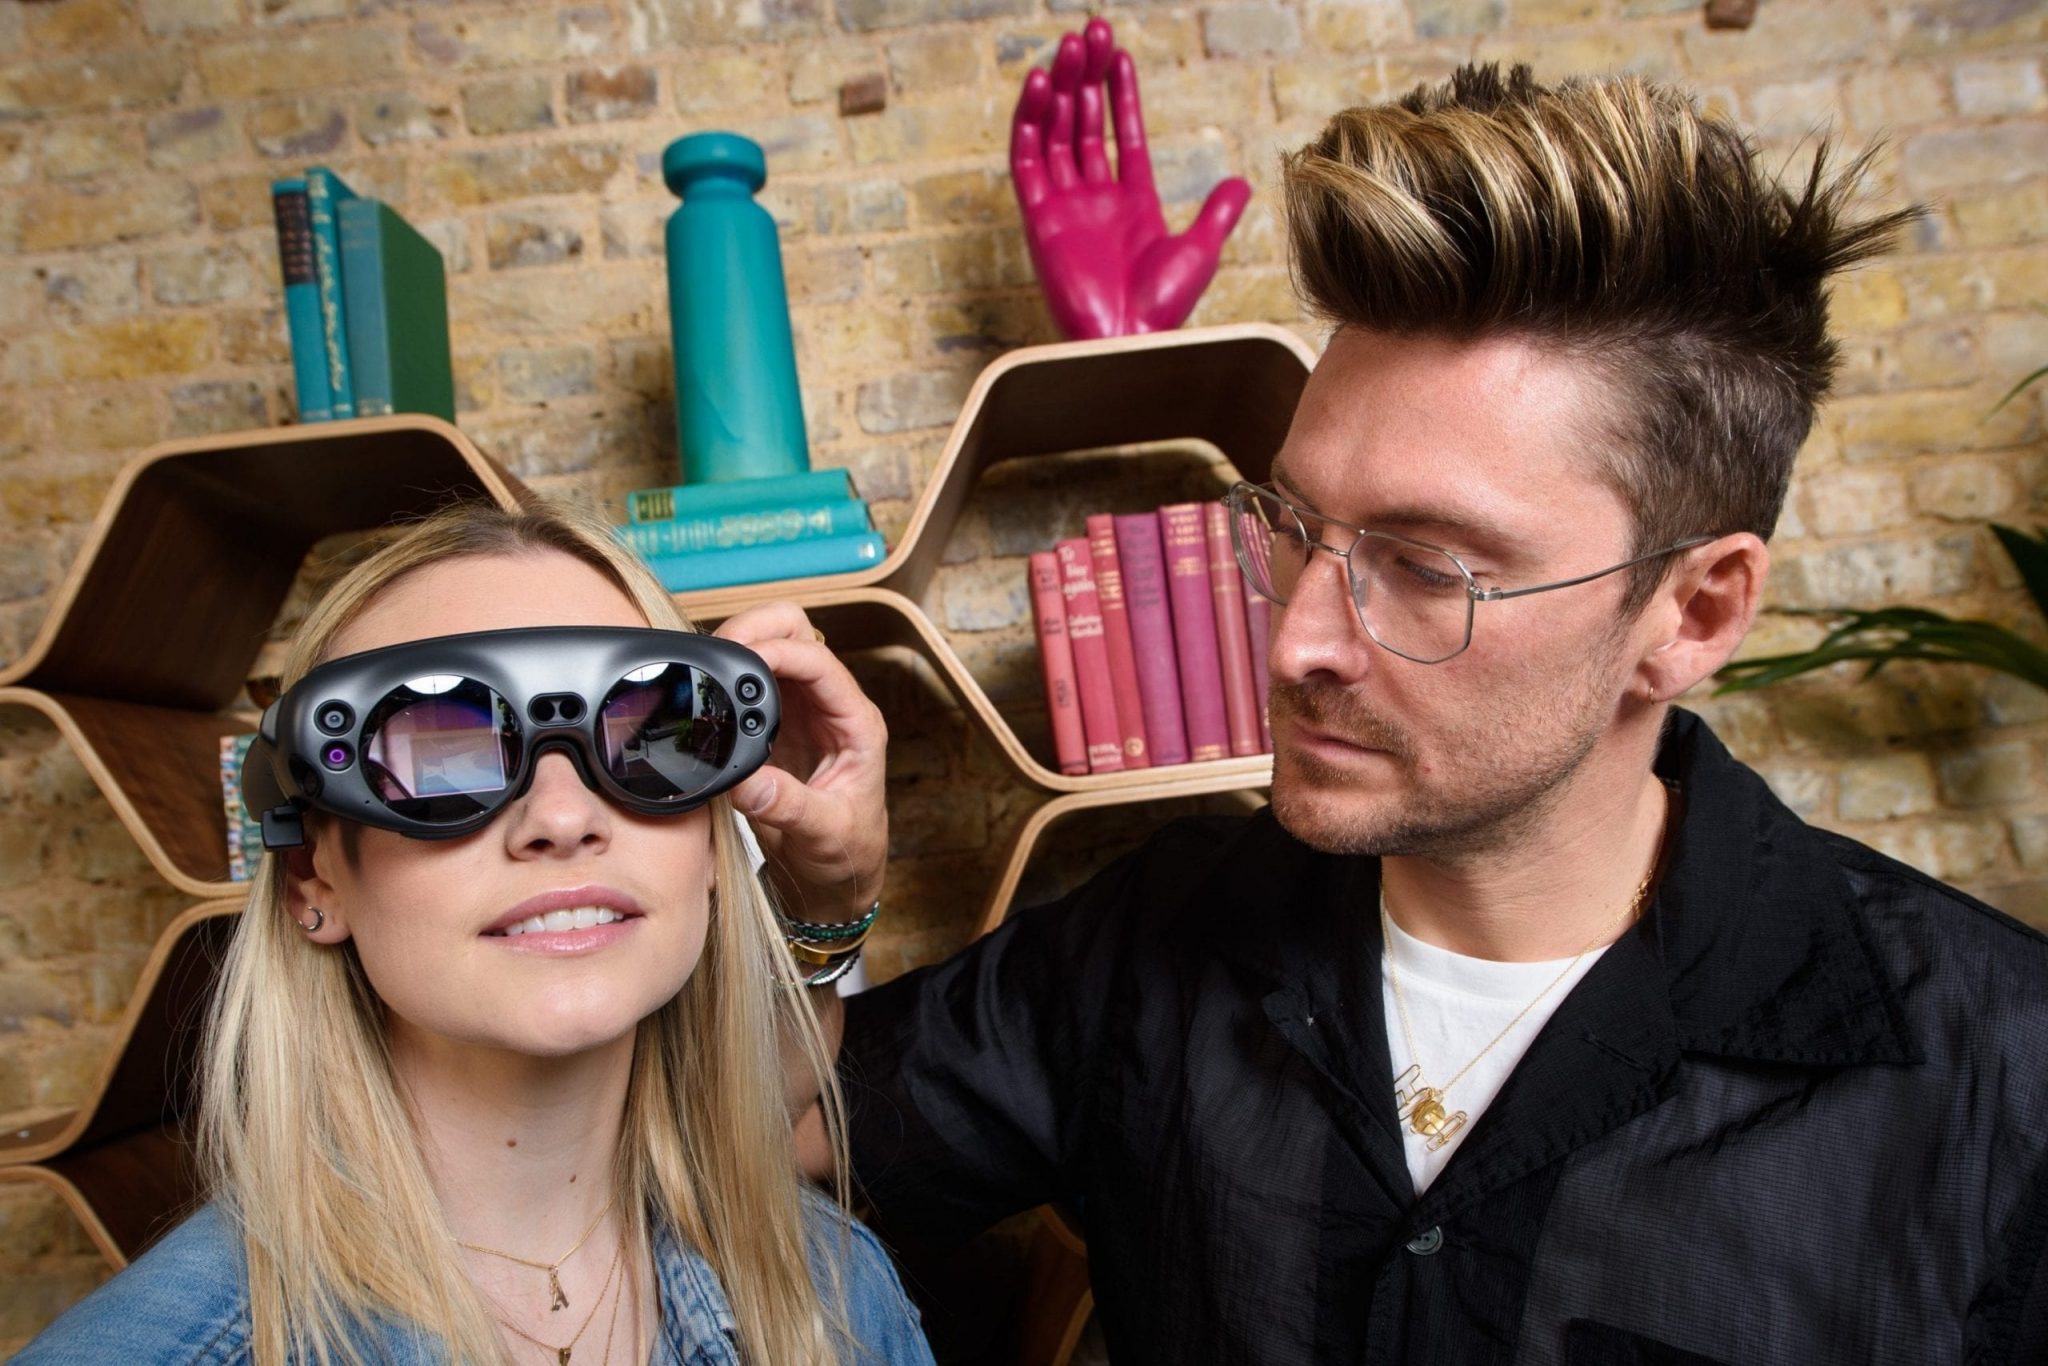 Designer Henry Holland, with staff member Ali Flowers, unveils the ‘Living Room of the Future’ as Three launches 5G home broadband at its flagship store on Oxford Street, London. The 5G fuelled AR experience will include; an AI Powered Voice Assistant, a Virtual Mindfulness Session, a Game Stream and shopping deliveries via drone. Photo credit: Matt Crossick/PA Wire